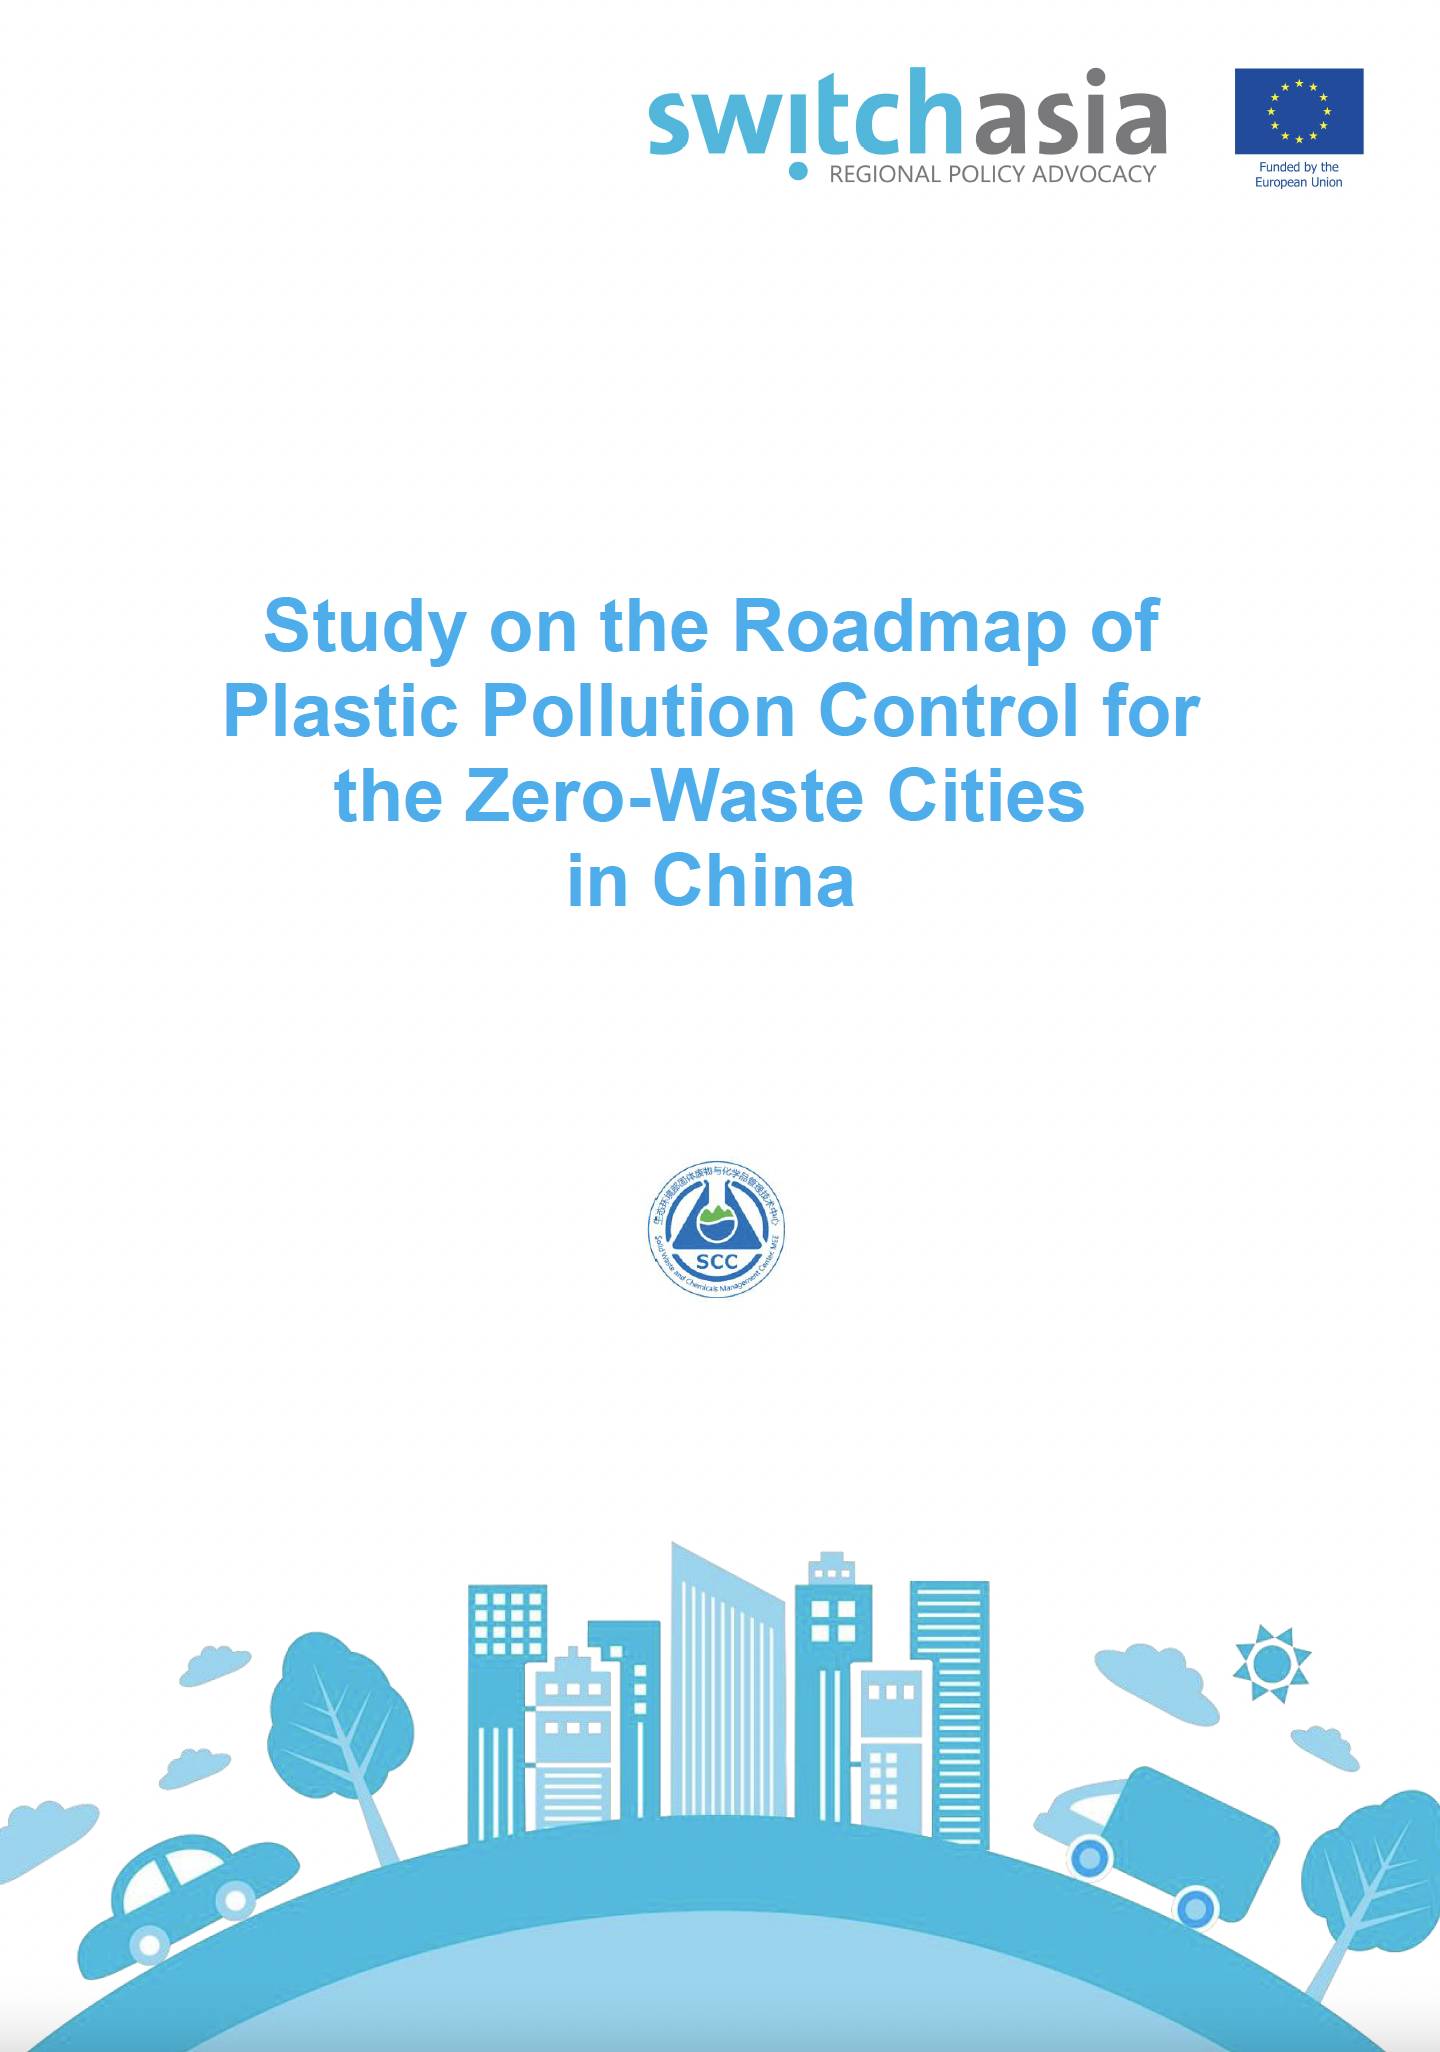 Study on the Roadmap of Plastic Pollution Control for the Zero-Waste Cities in China